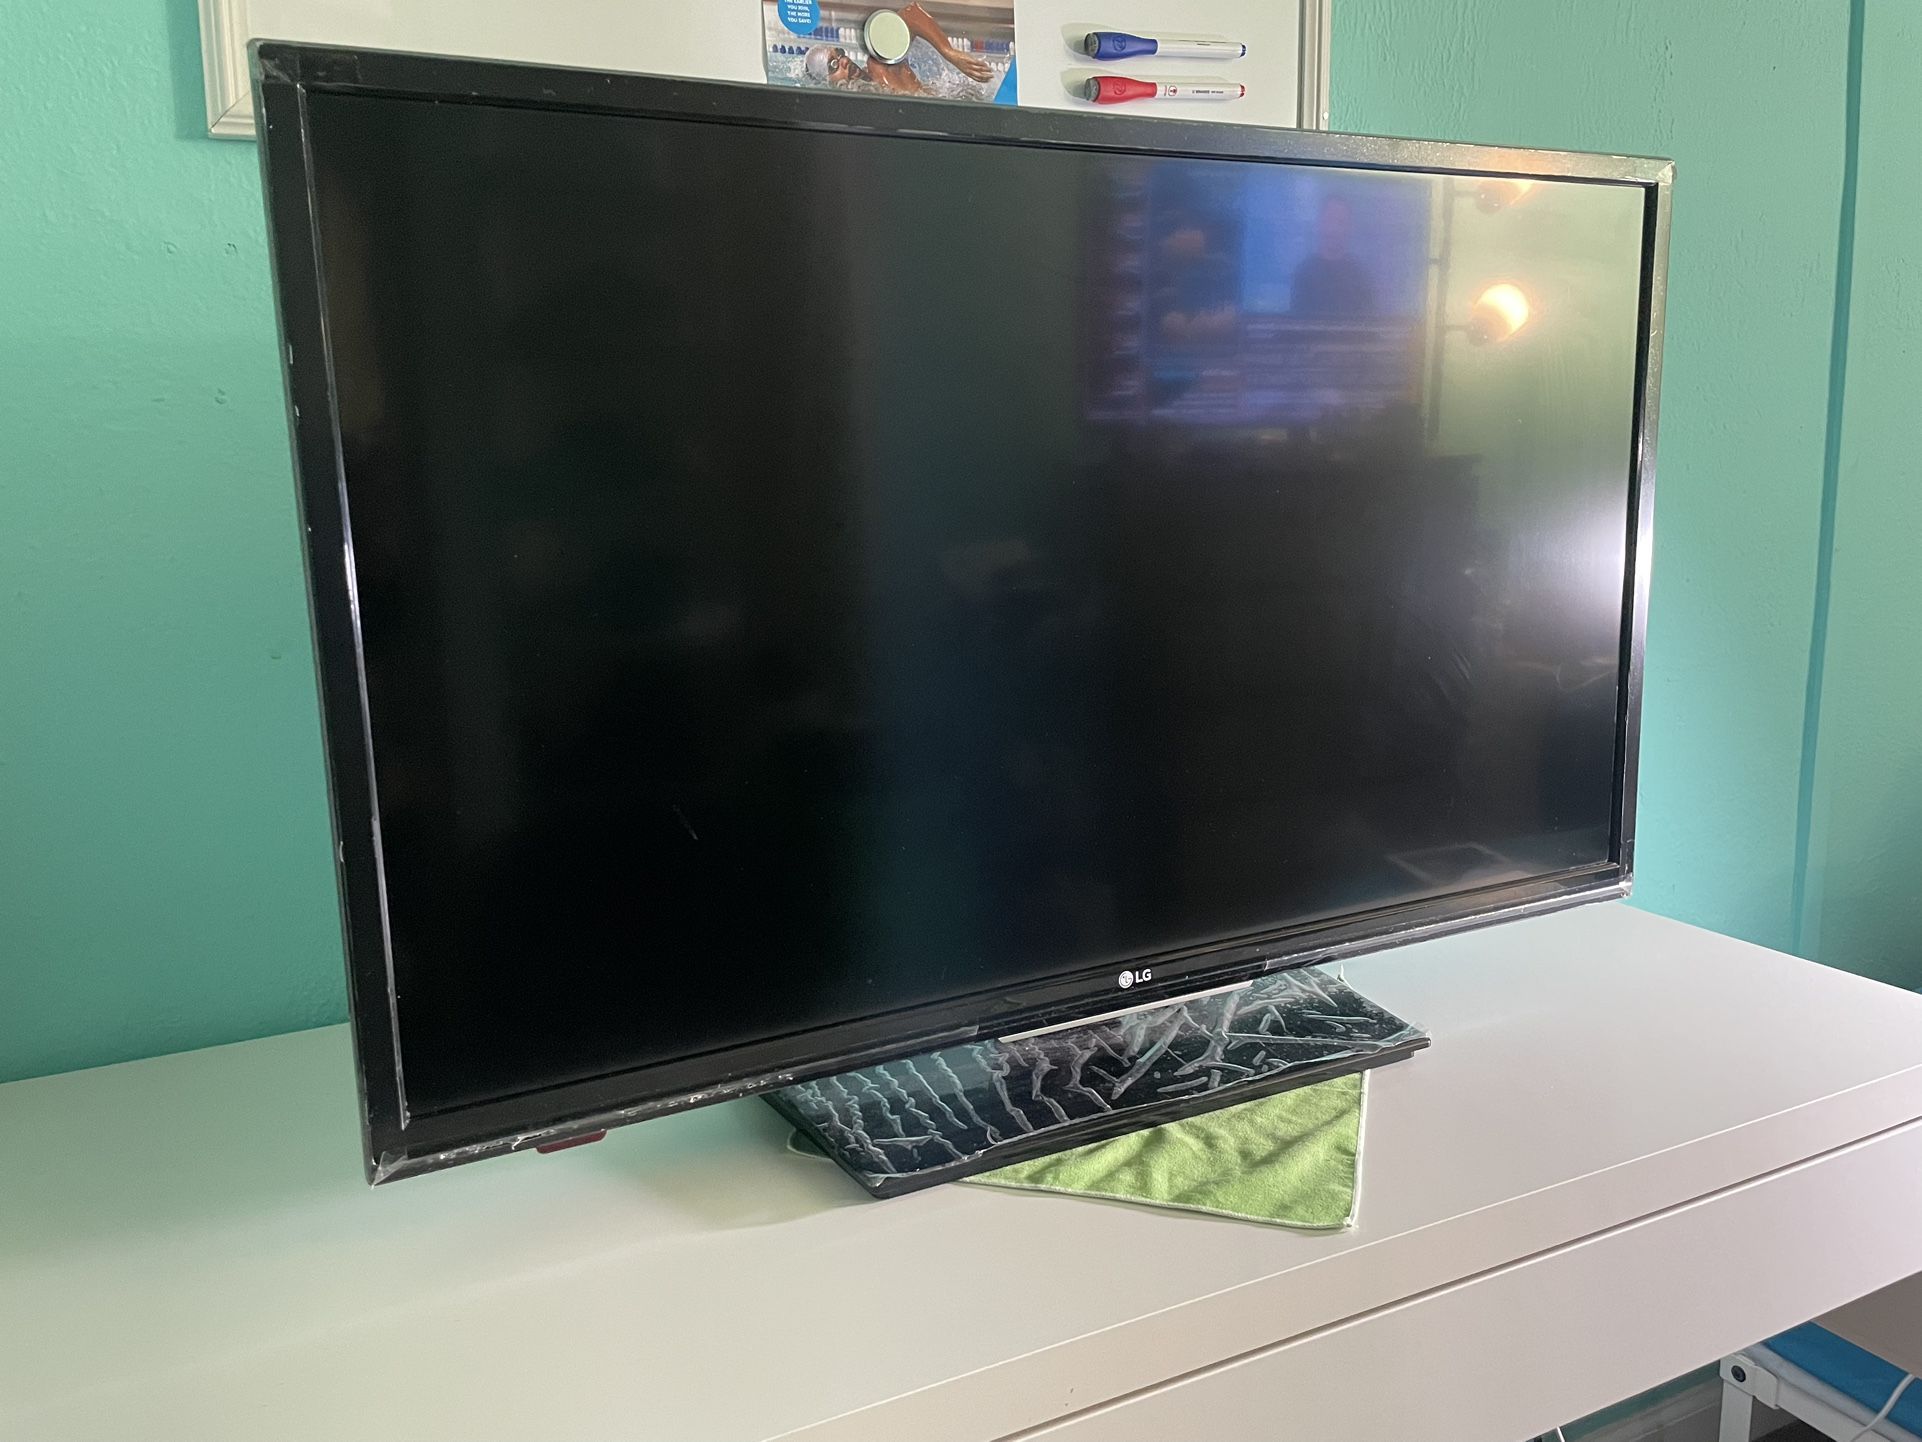 32LF500B 720p LED TV - 32" Class (31.5" Diag) Used For Sale $150